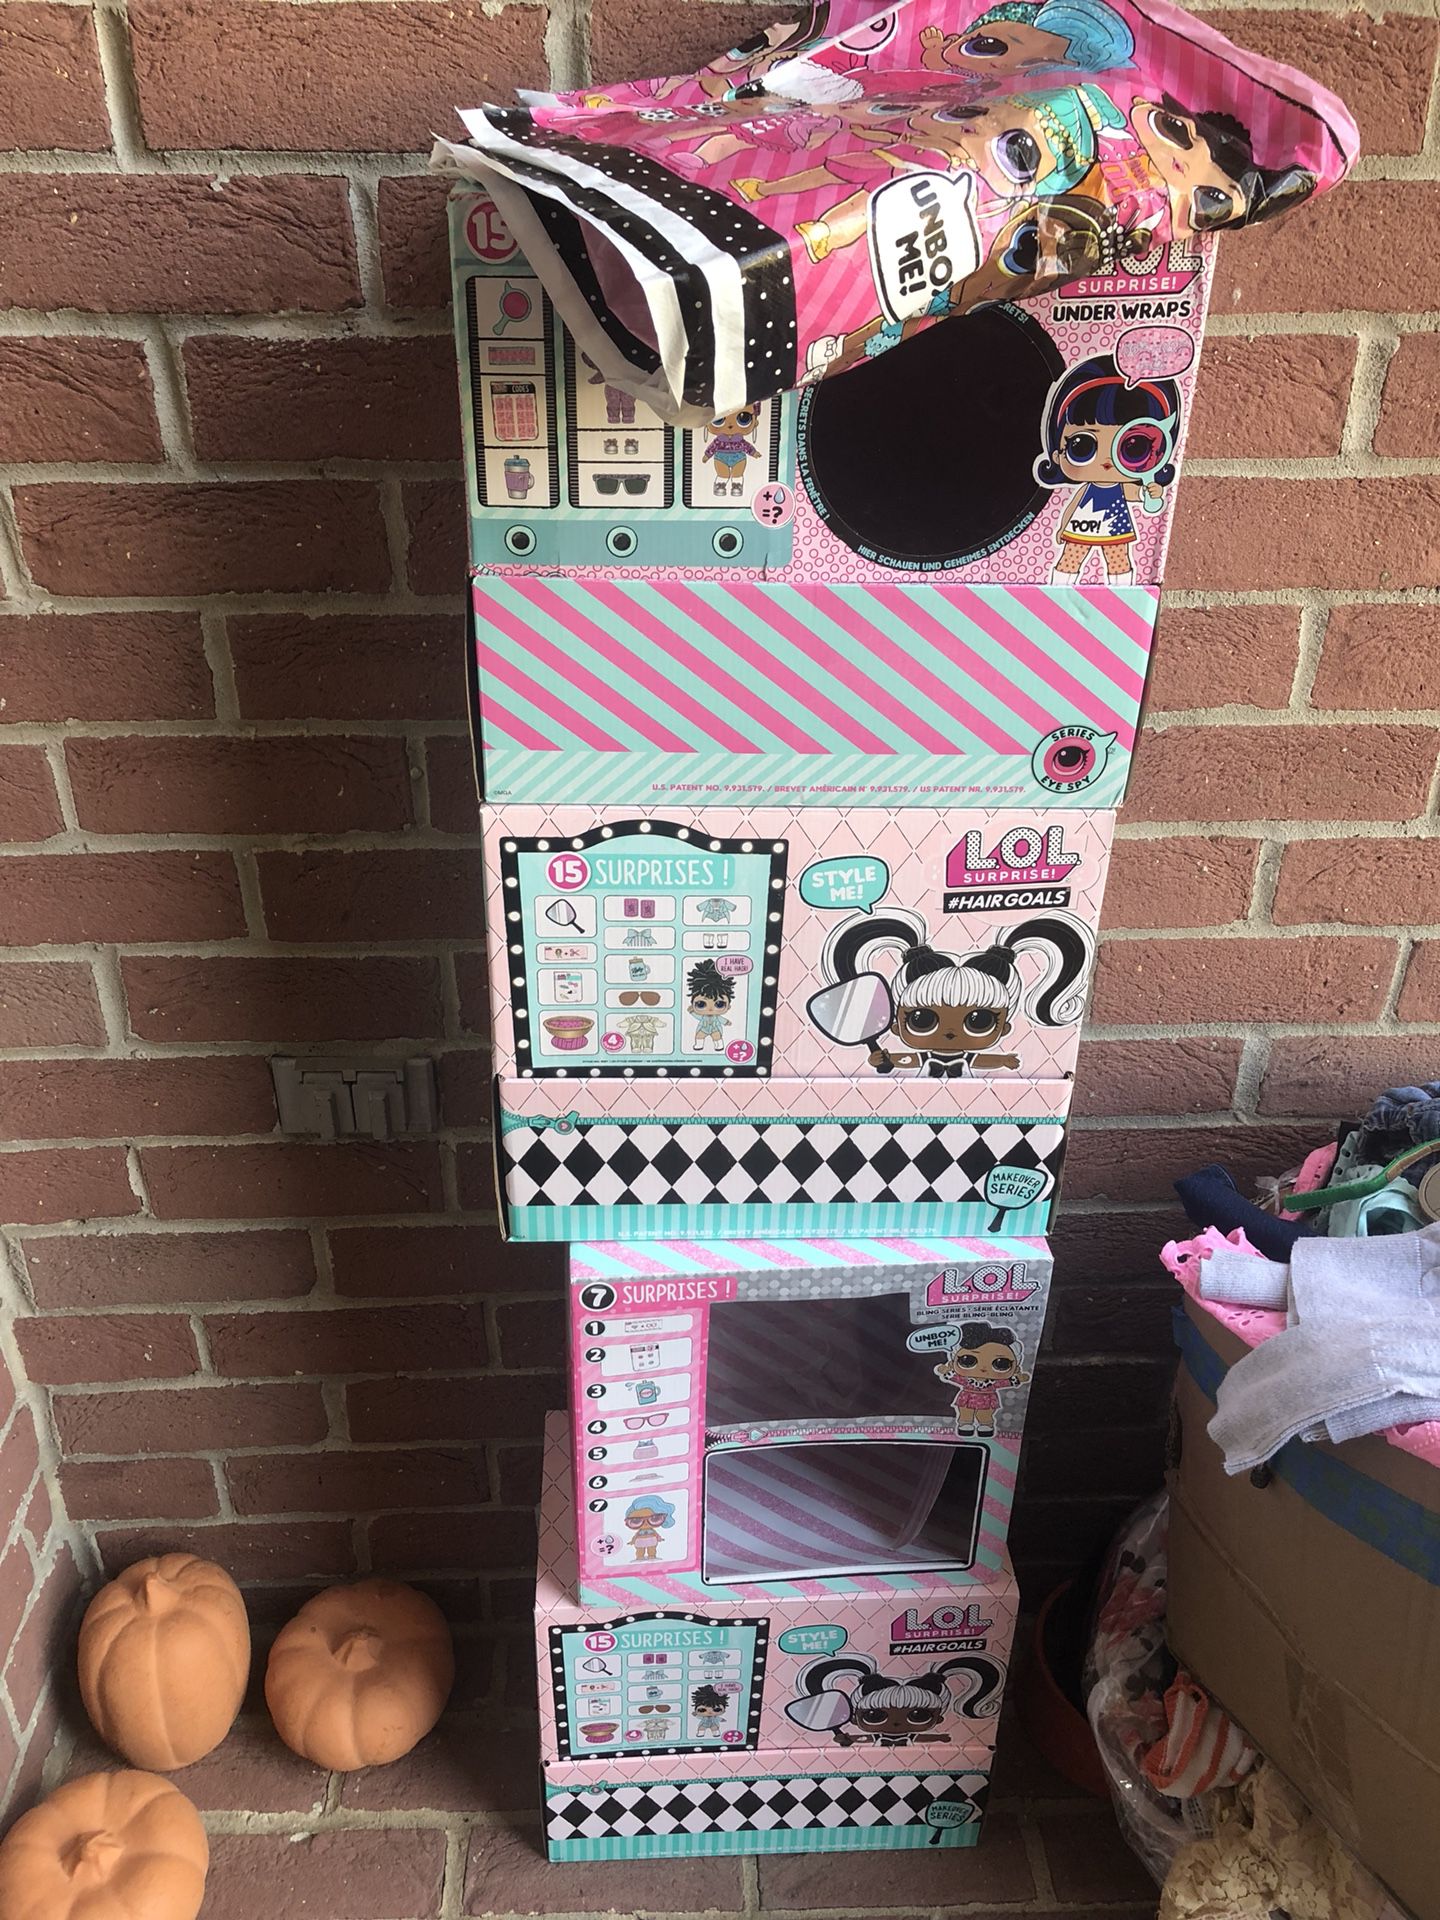 5 L.O.L doll boxes and table cover to use for birthday snacks